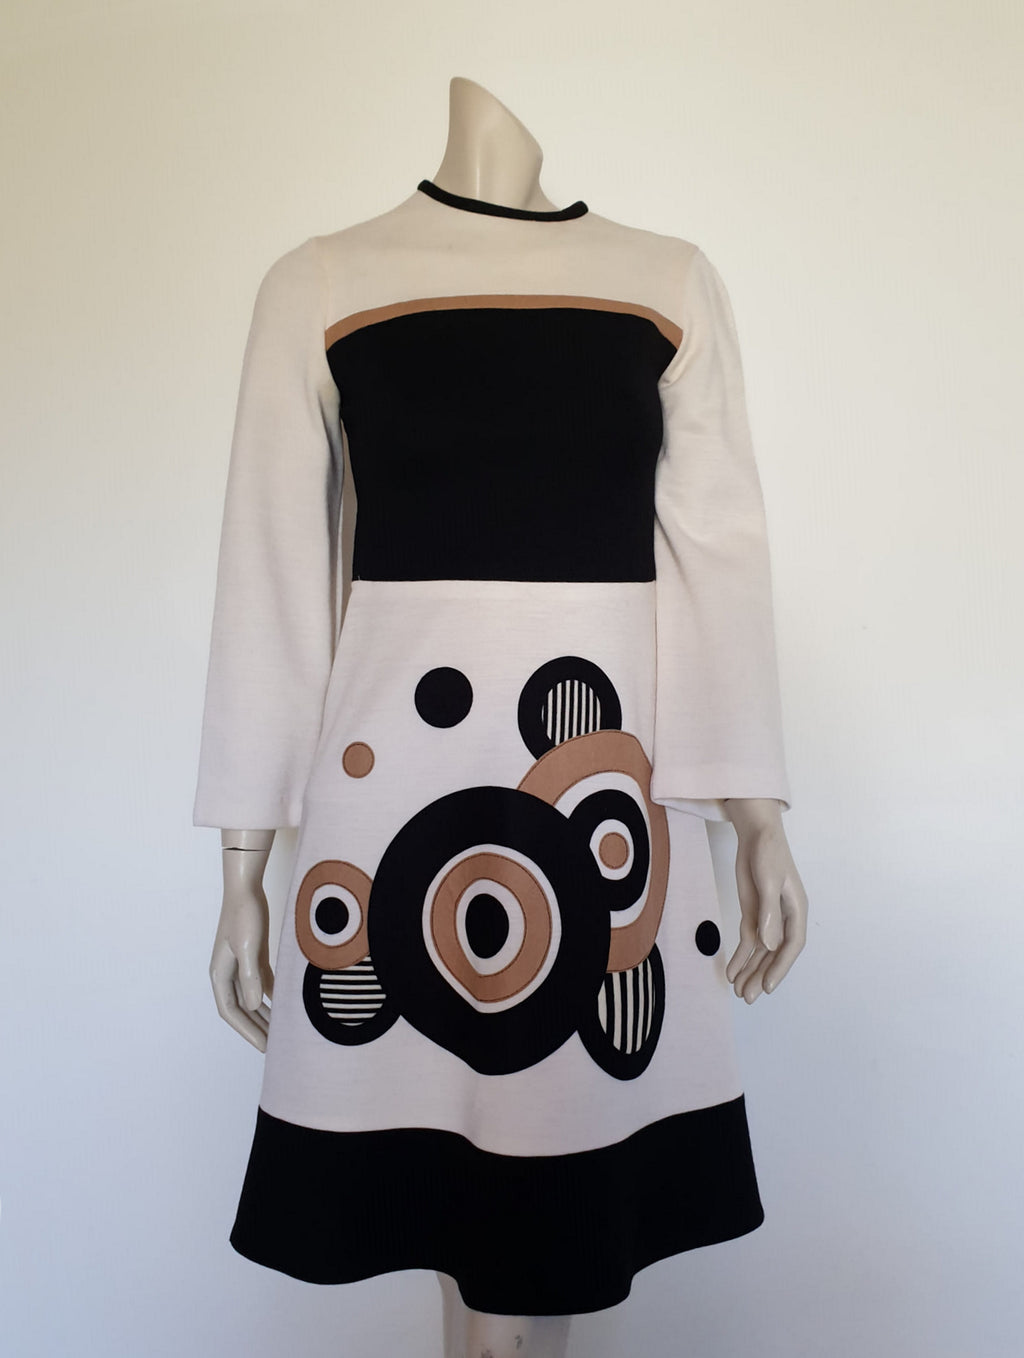 1960s vintage french mod style dress with circle appliques by Luis Mari